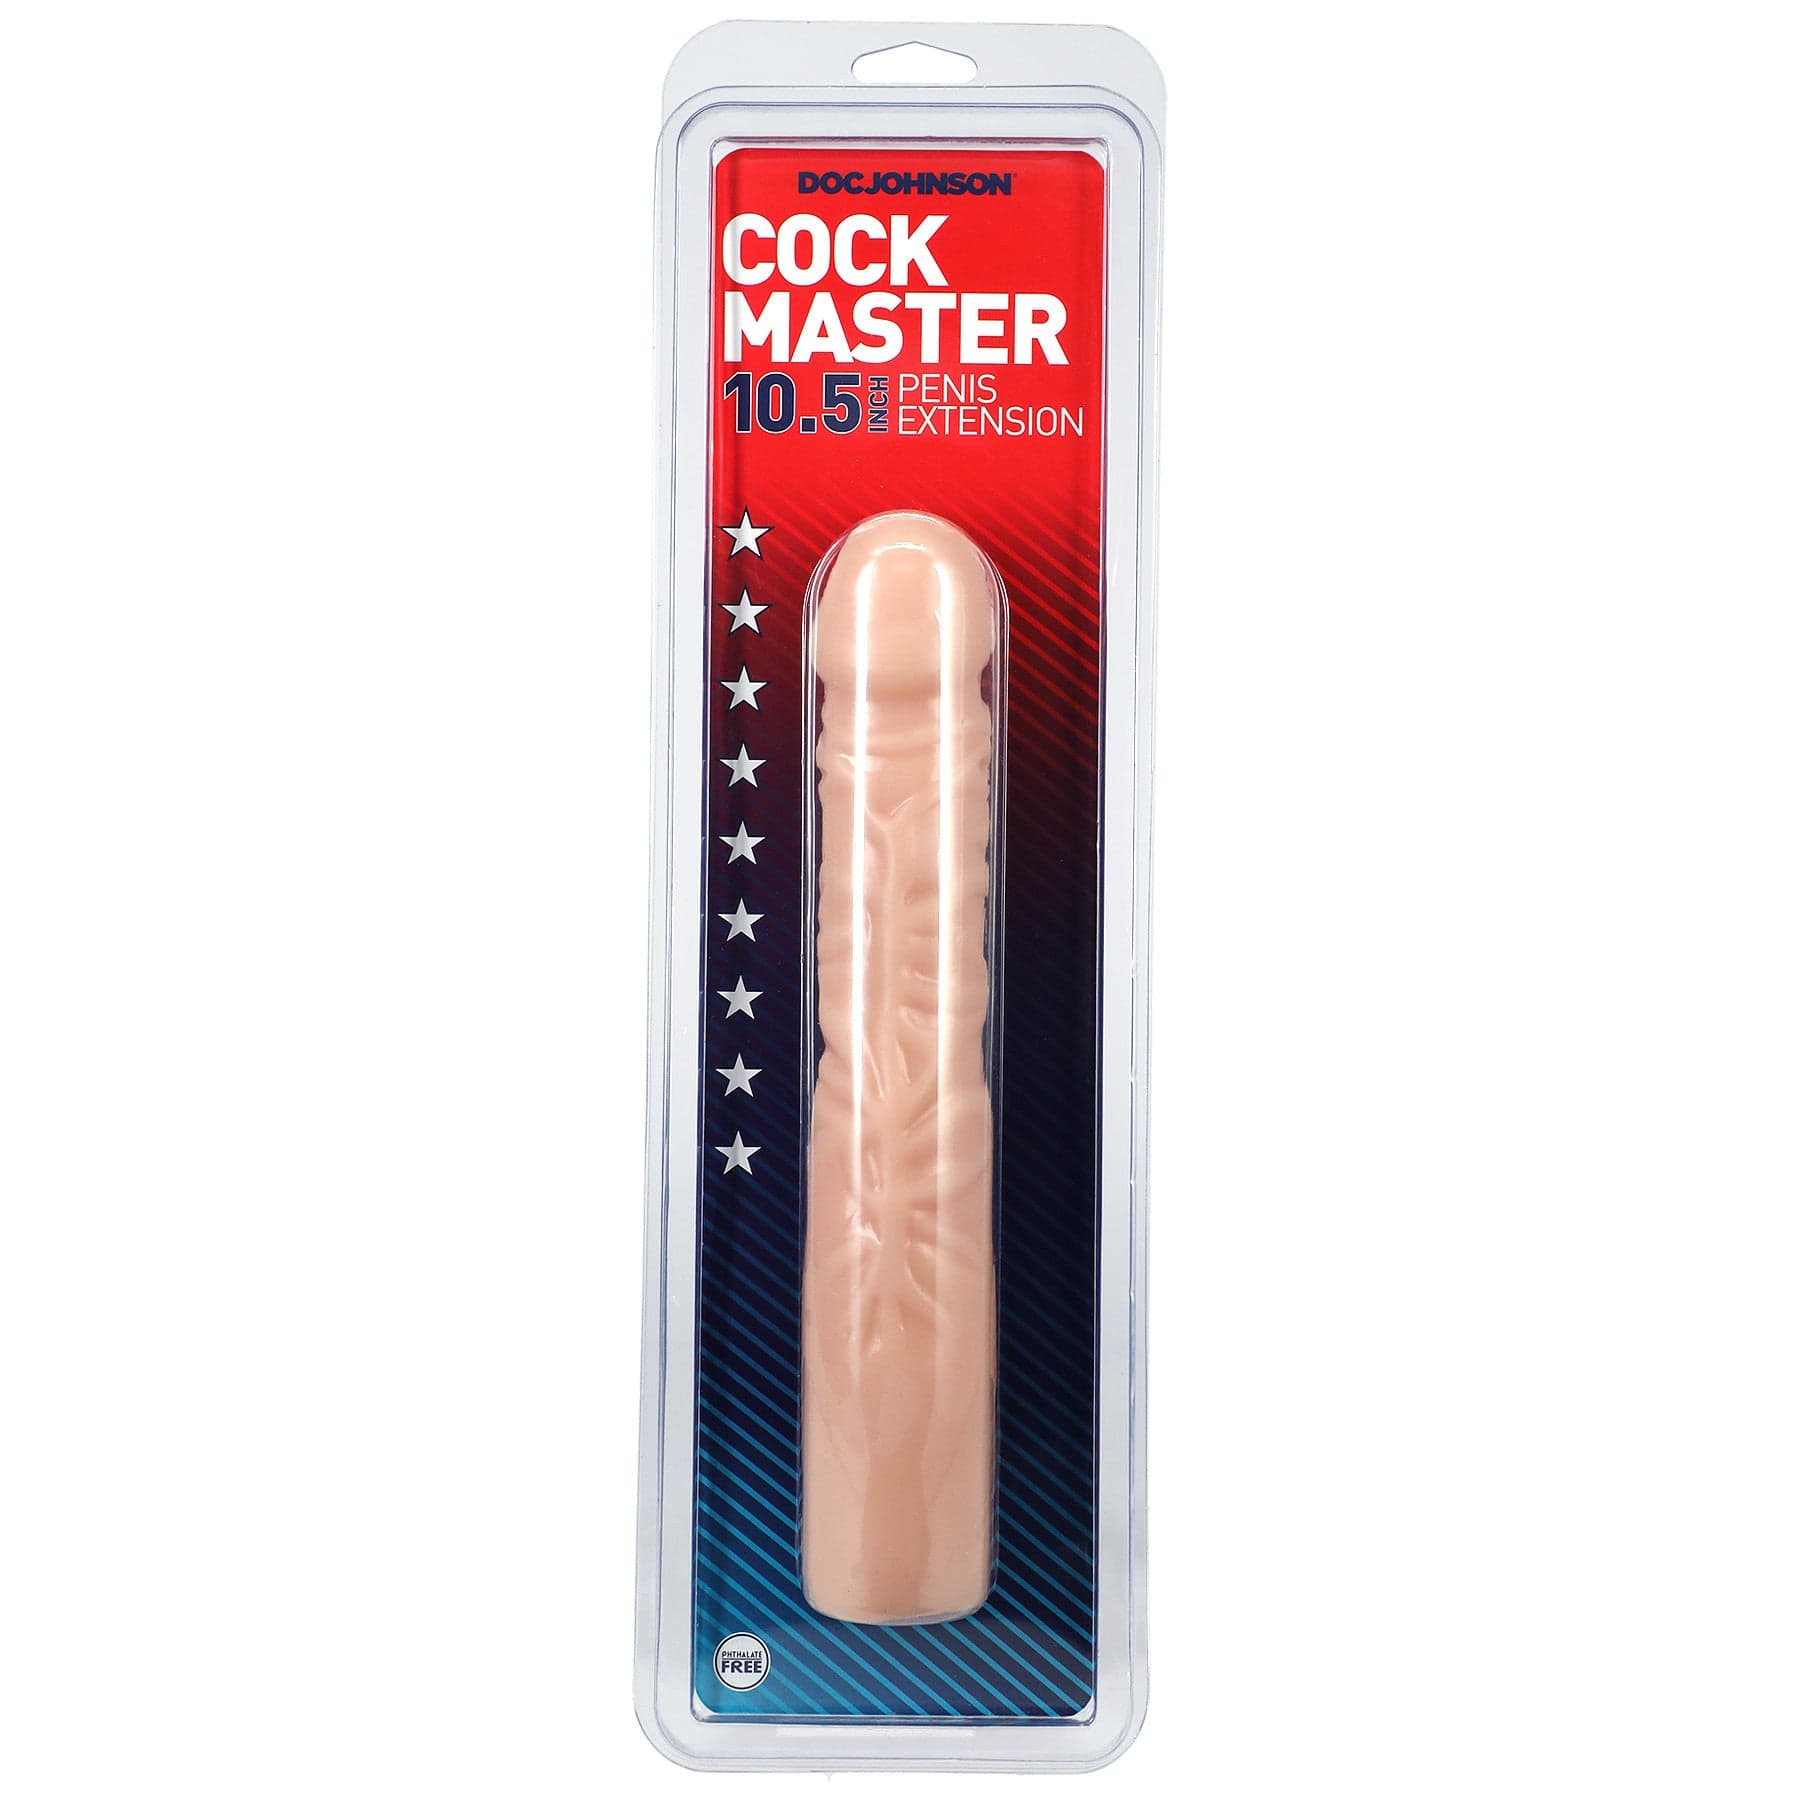 COCK MASTER 10.5" EXTENSION